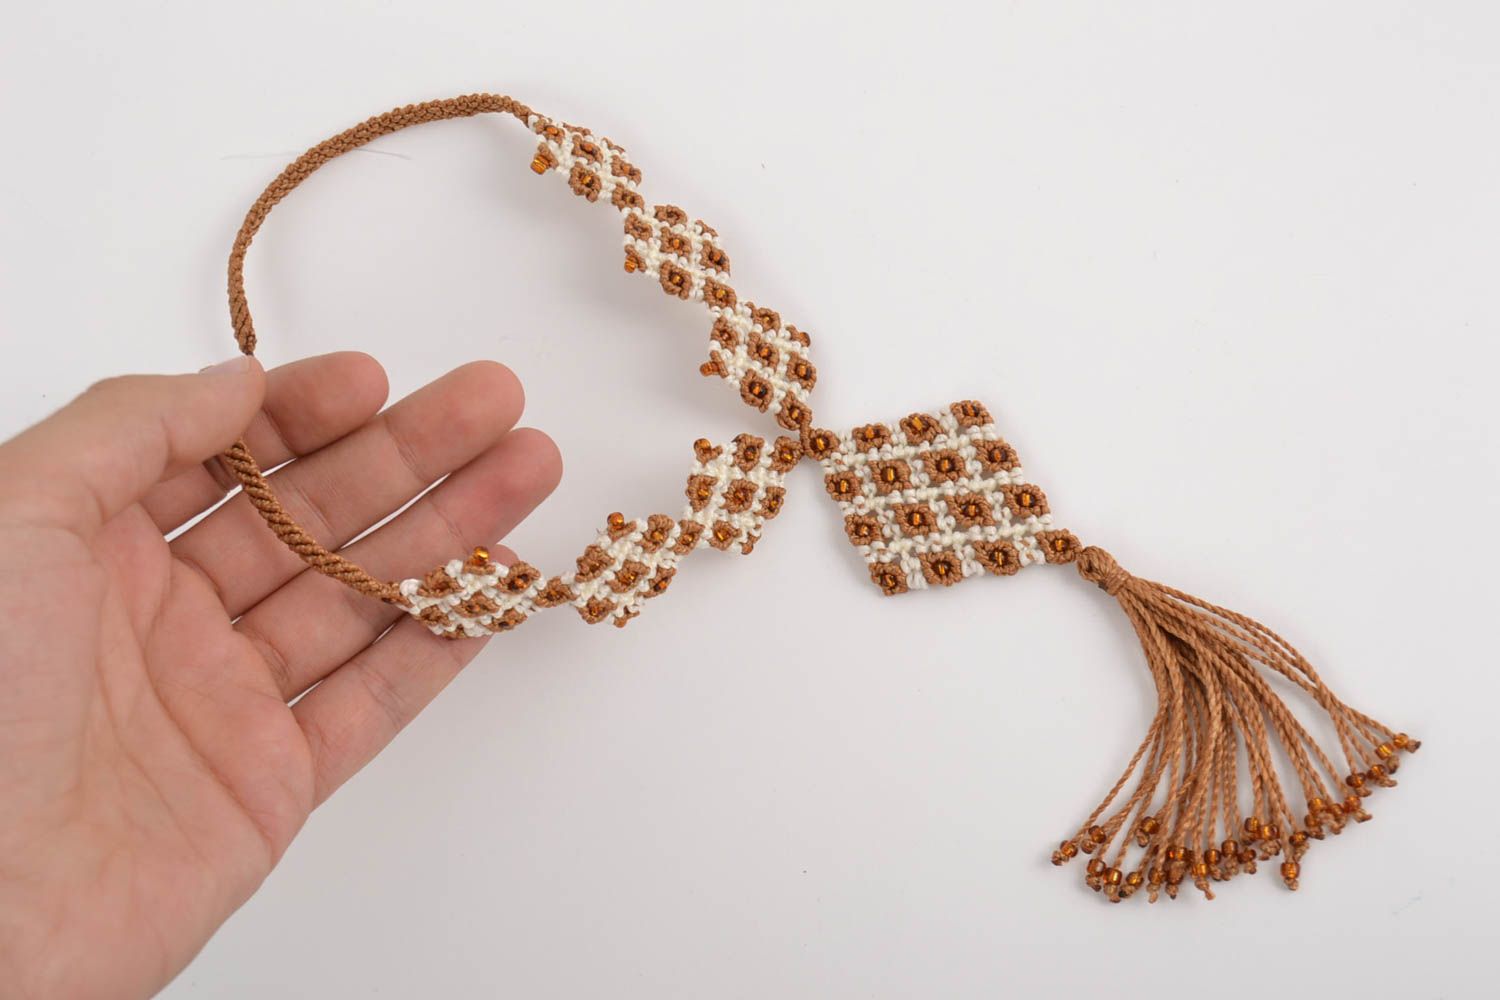 Handmade designer macrame necklace woven of threads with tassel white and beige photo 4